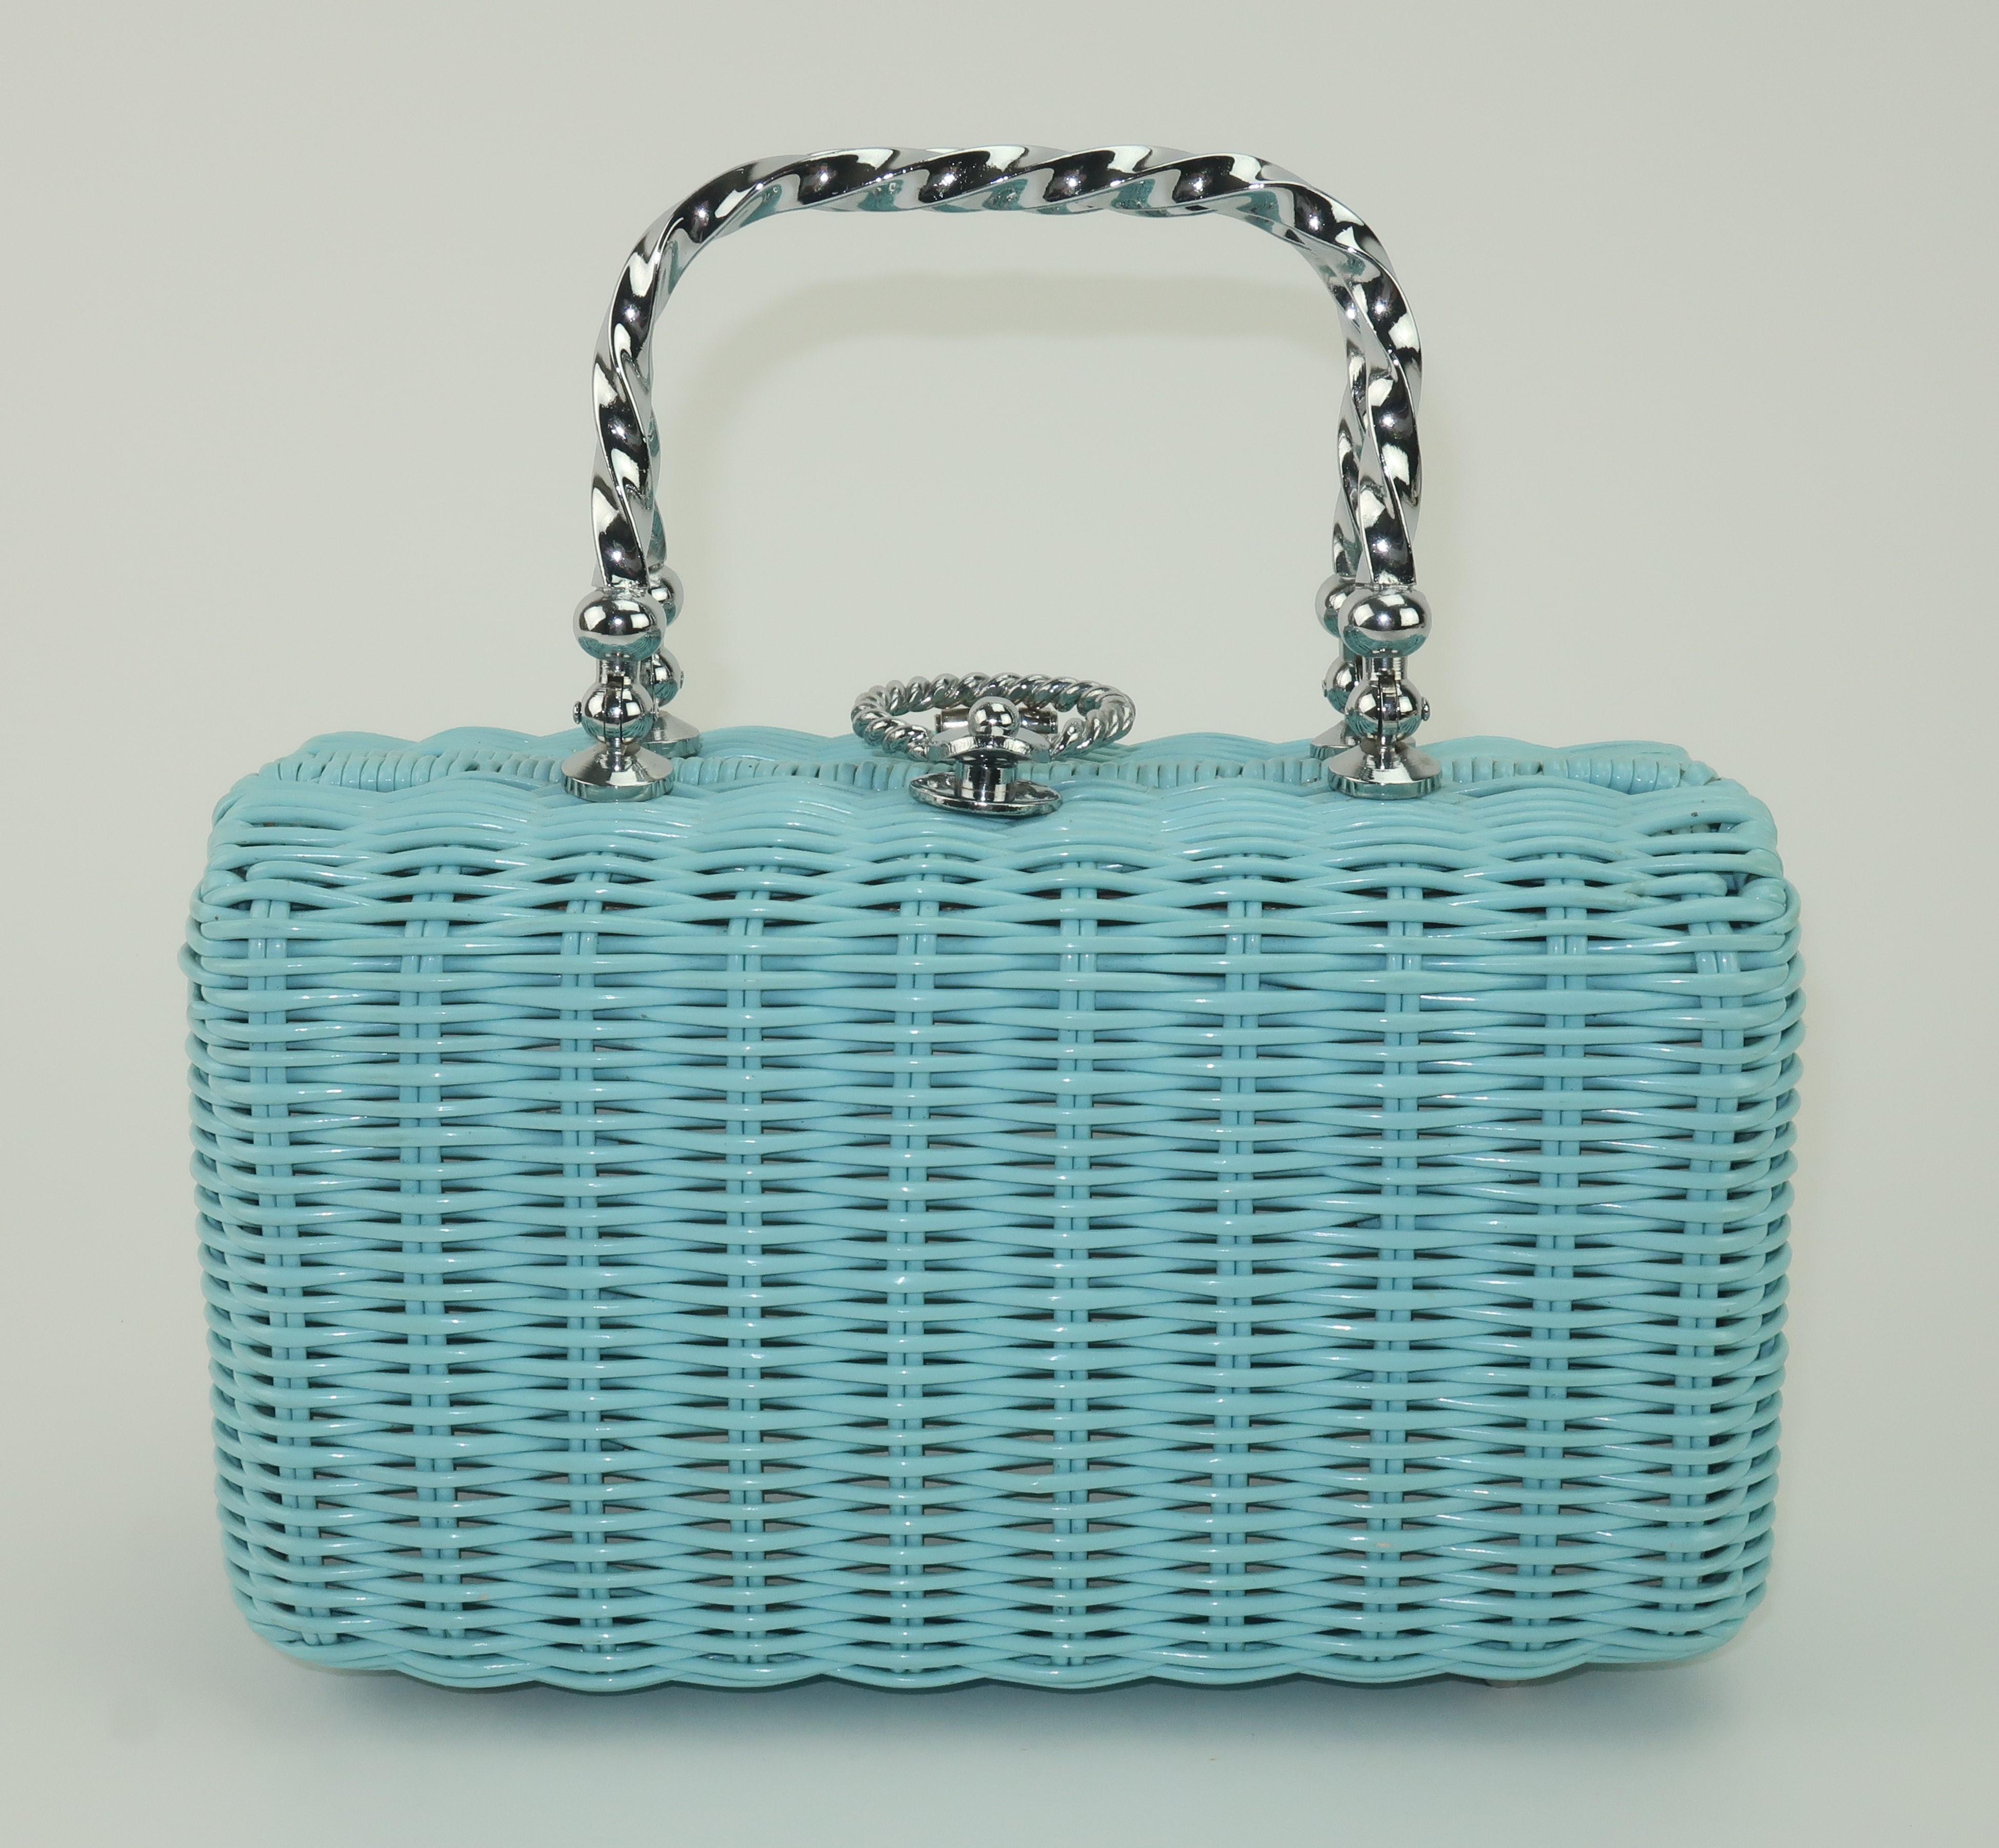 1960's baby blue coated wicker handbag with silver tone metal ring closure and twisted top handles.  The closure is reminiscent of a door knocker and opens to reveal a vinyl lined interior with three compartments including a center zippered pocket. 